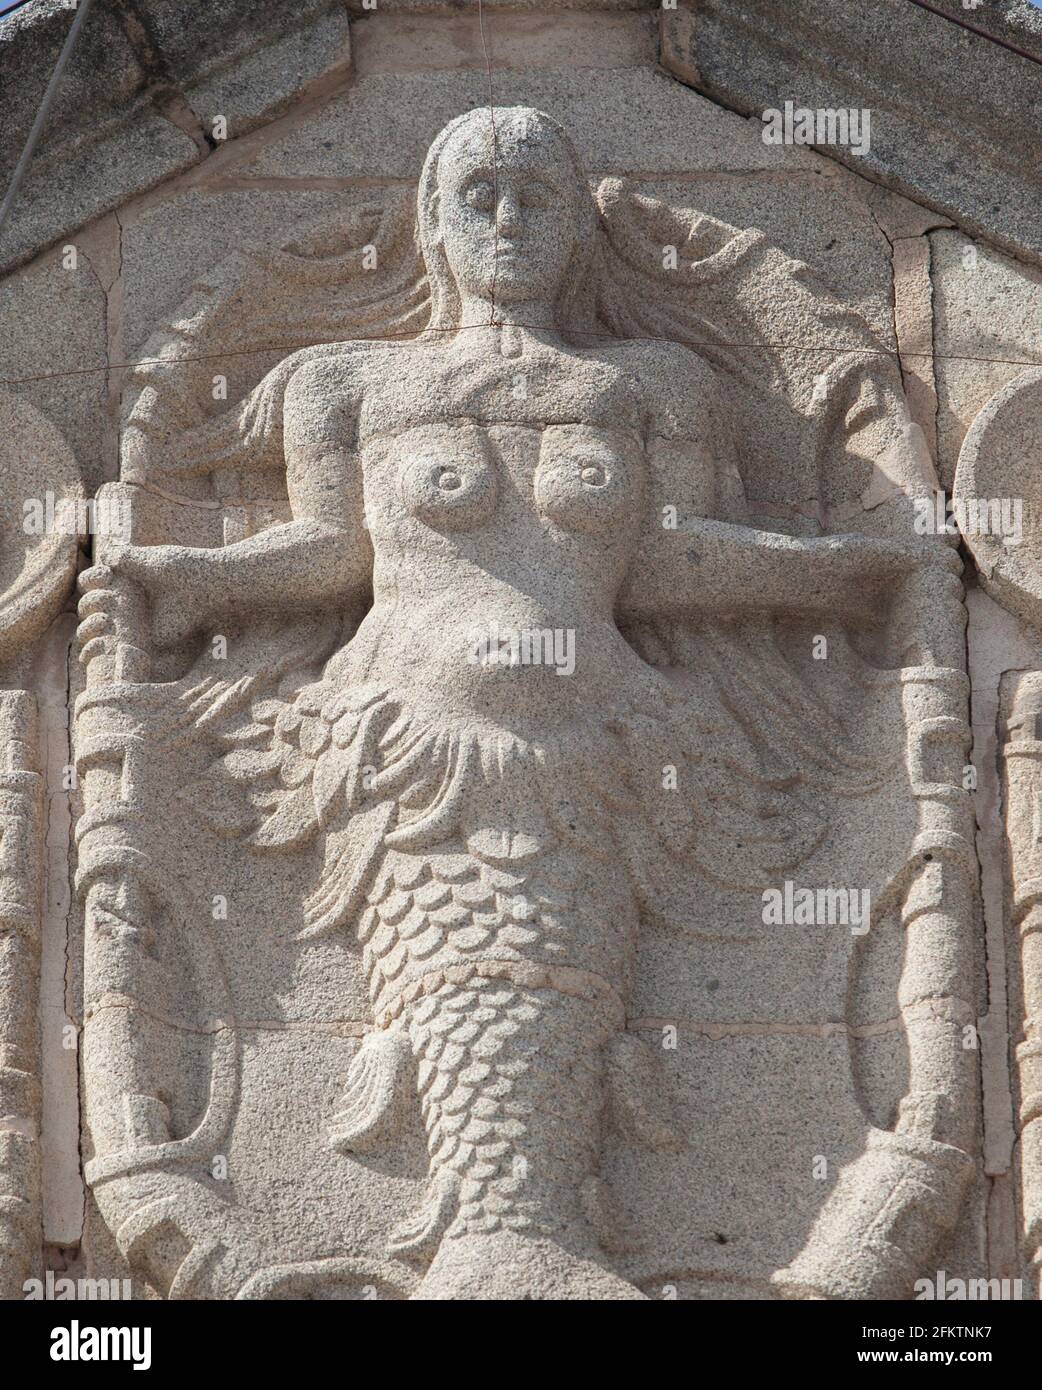 Coats of arms with mermaid relief at Villanueva de la Serena, Badajoz, Spain. This Mythological creature is the Symbol of the village. Stock Photo